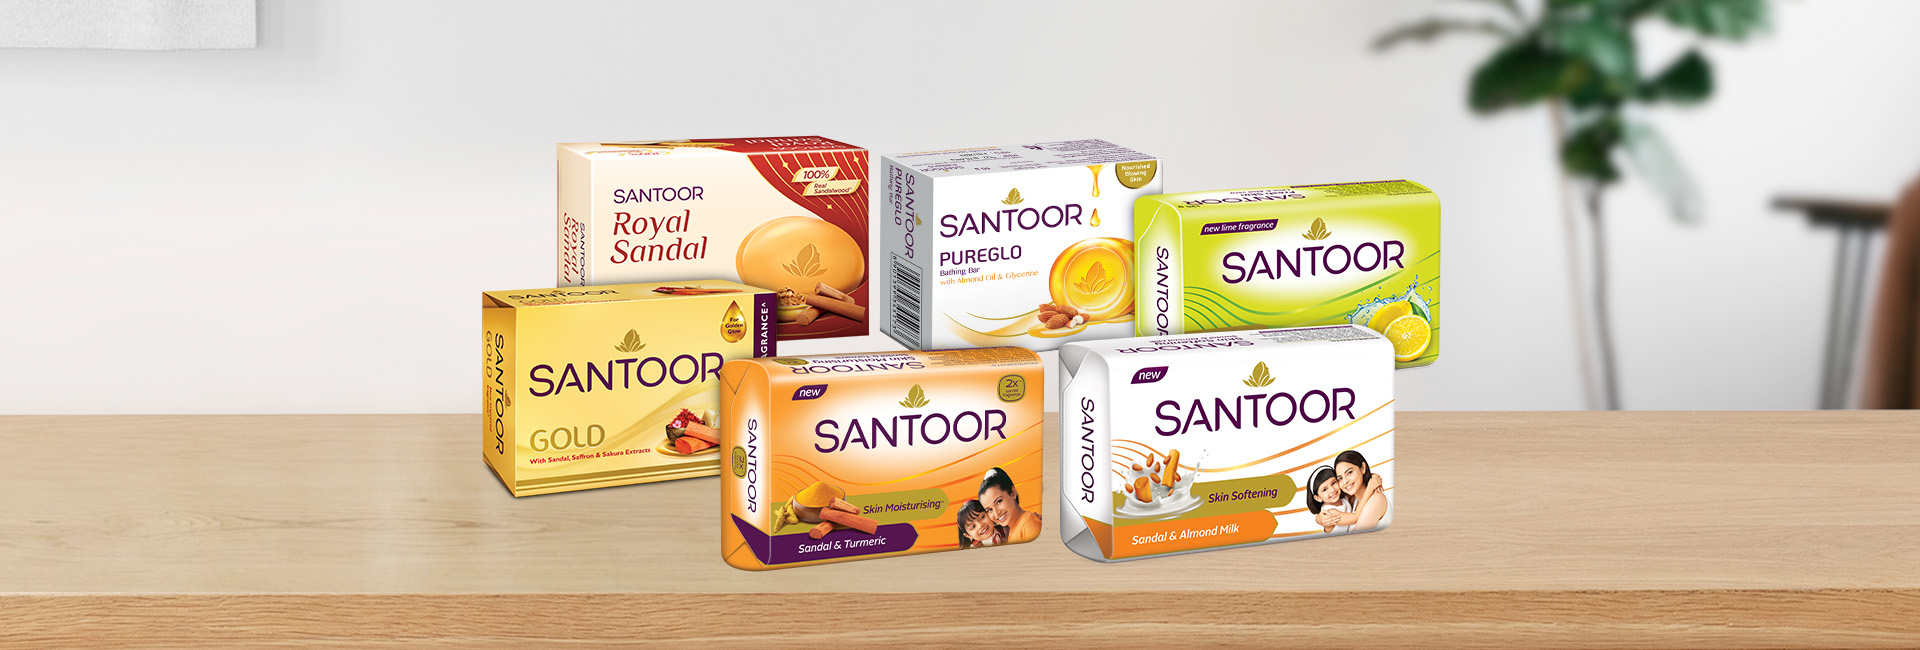 Santoor Beauty Soap Products